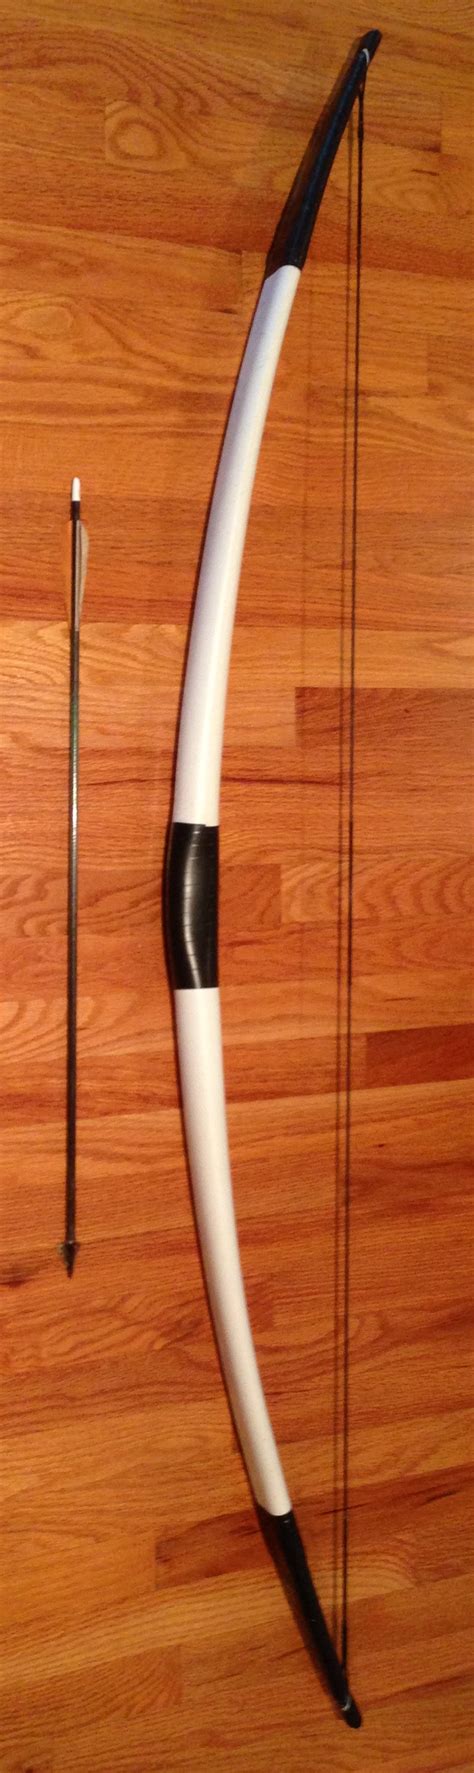 My complete 80 Pound PVC Long Bow by Kyle Wind! -With creative credit to Nick and his YouTube ...